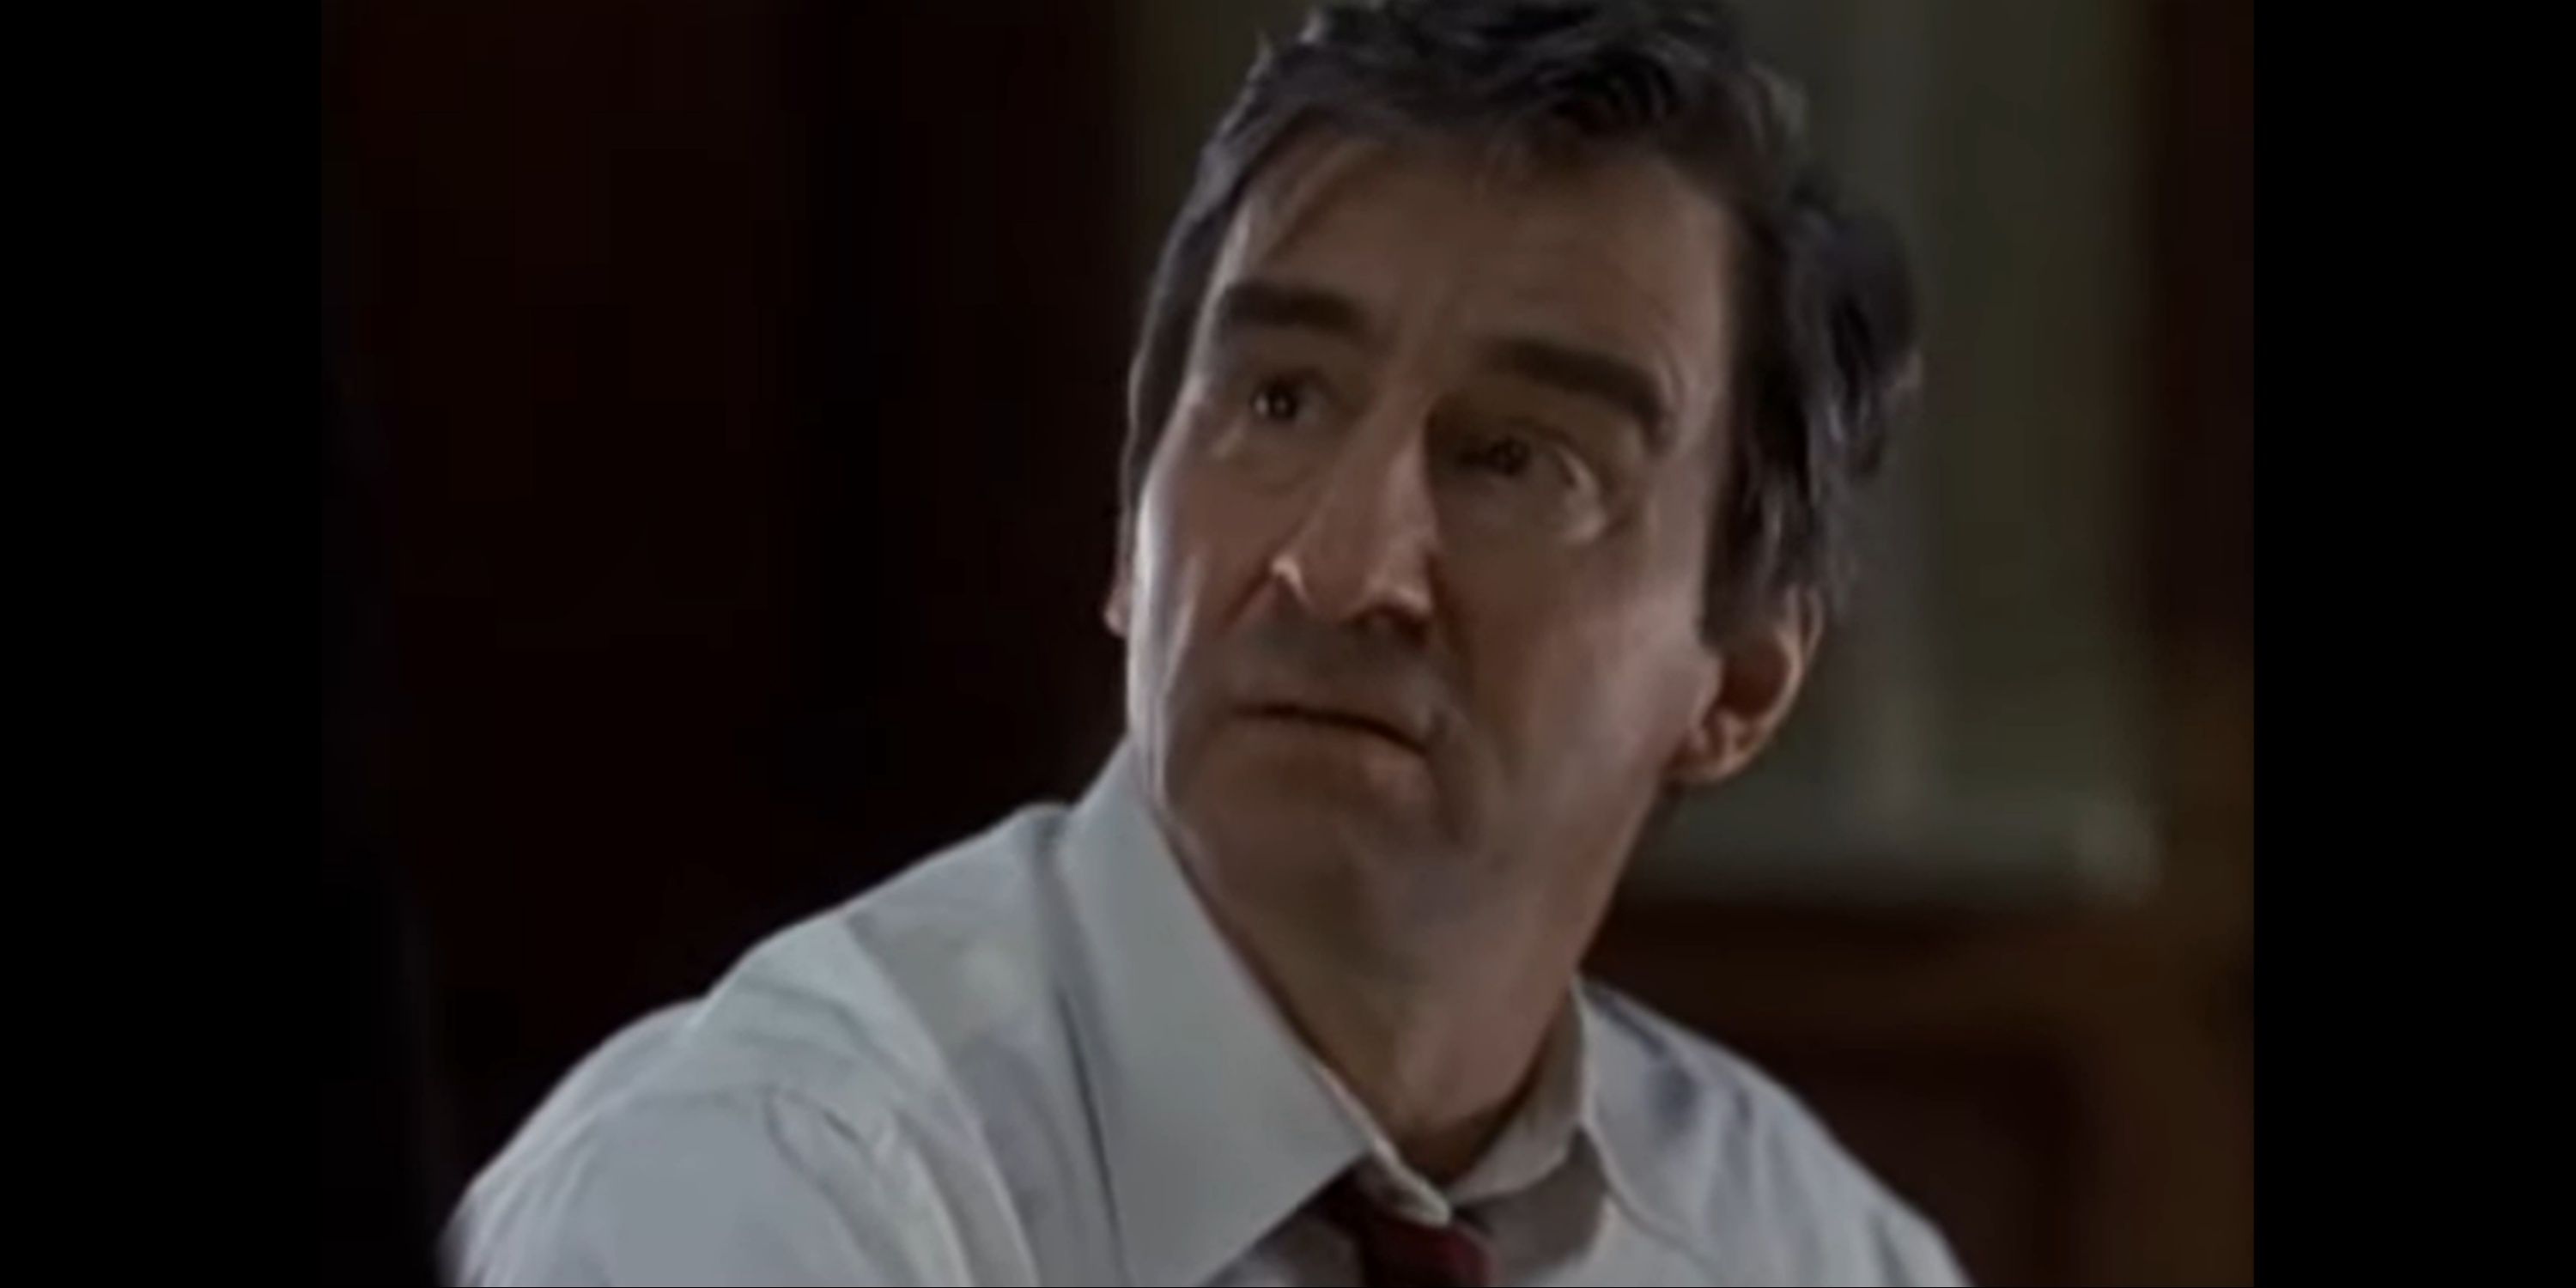 A still image of Jack McCoy from Law & Order as he prepares to prosecute a hate crime